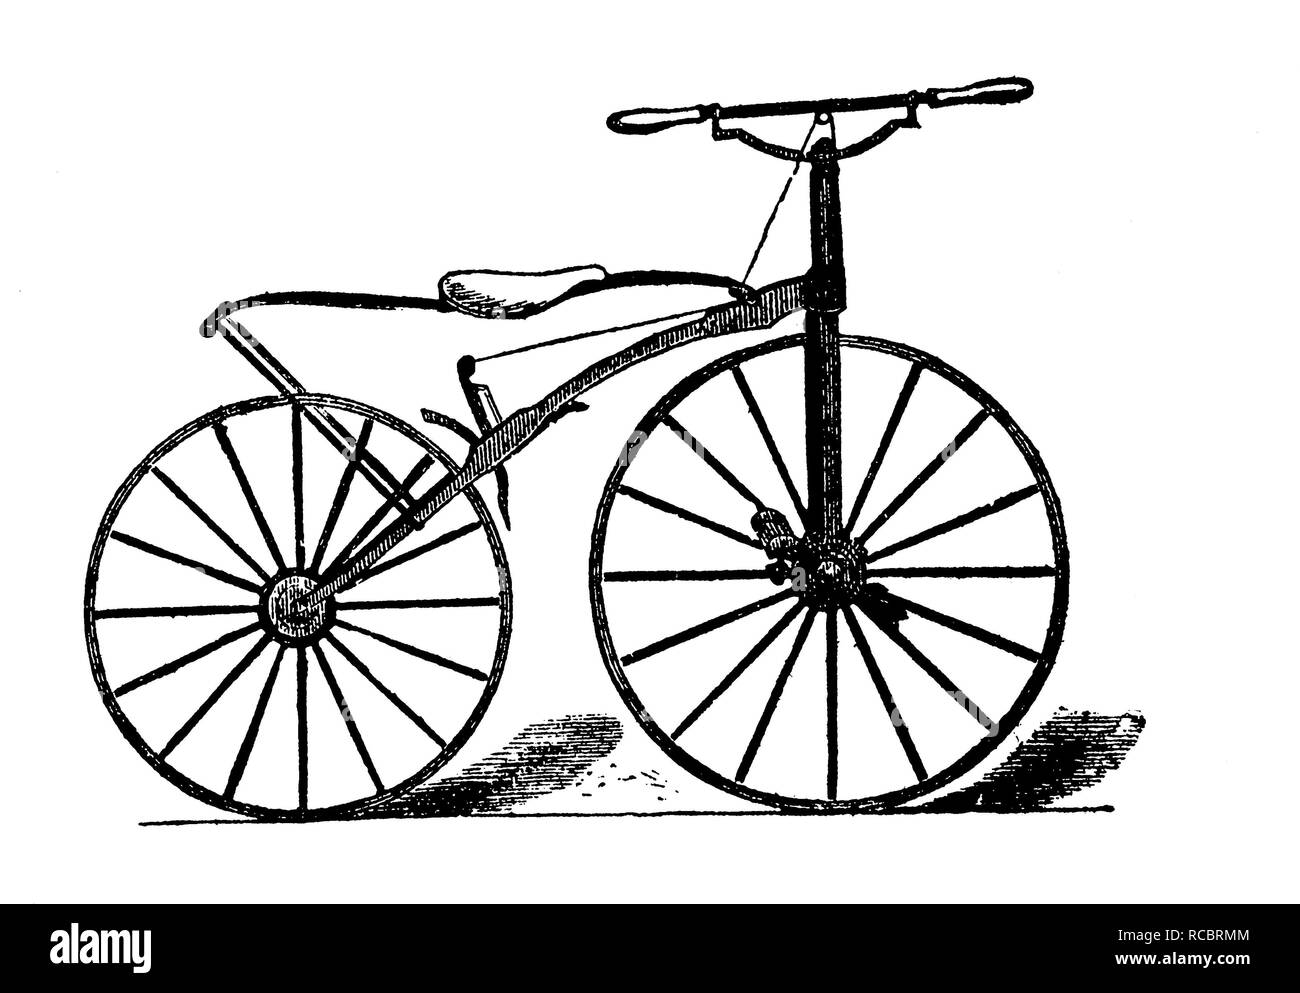 velocipede-from-1868-historical-engraving-1880-stock-photo-alamy